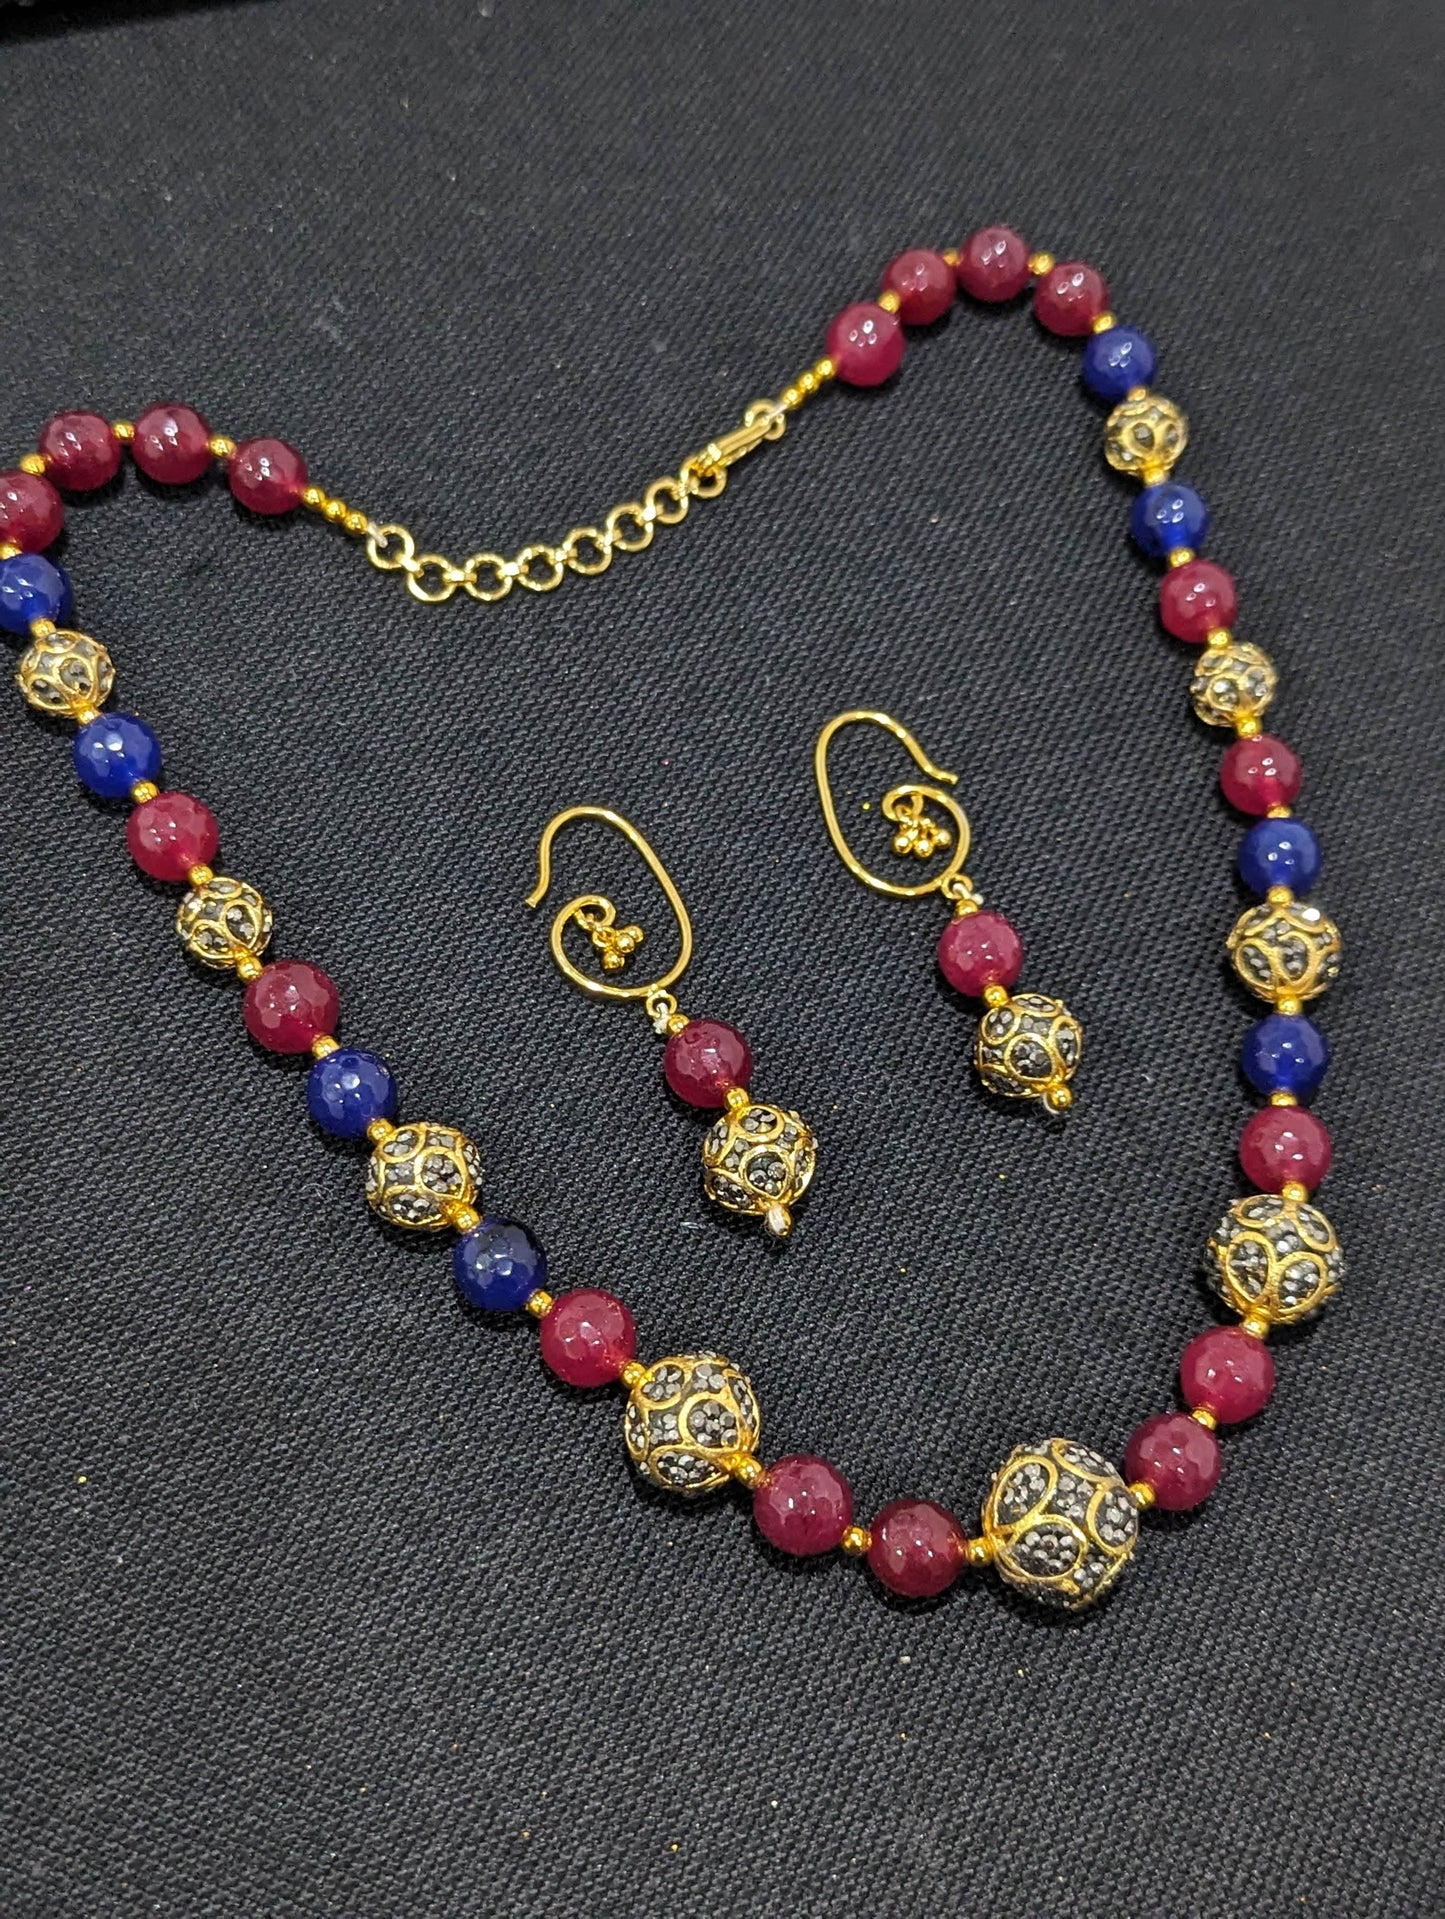 Color Ball bead necklace and earrings set